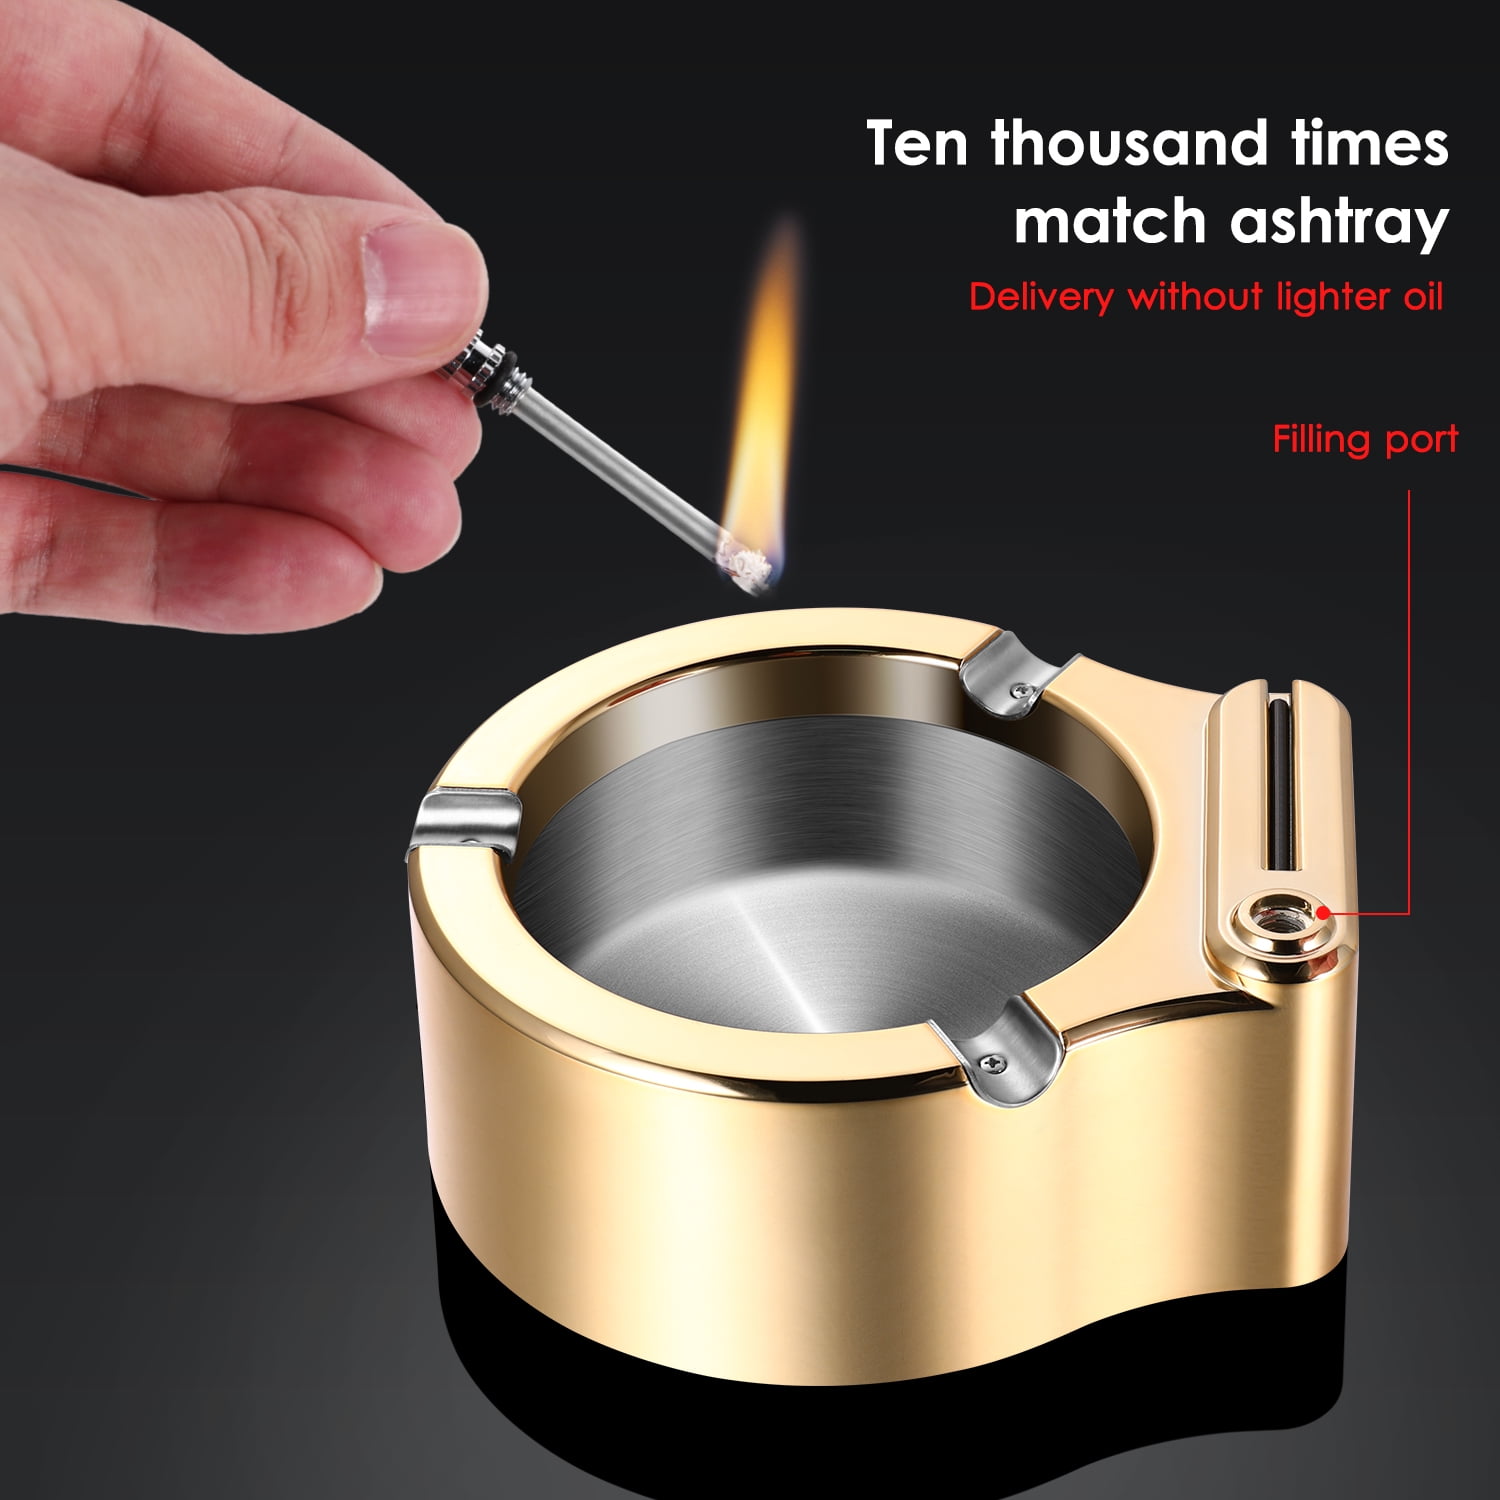 Black Ashtray Cigar Ashtray Stainless Steel Ashtray Ten Thousand Match Lighter Men Smokers Gifts Simple Stylish Indoor Outdoor Patio Home Office Use Blue Ice/Black/Gold